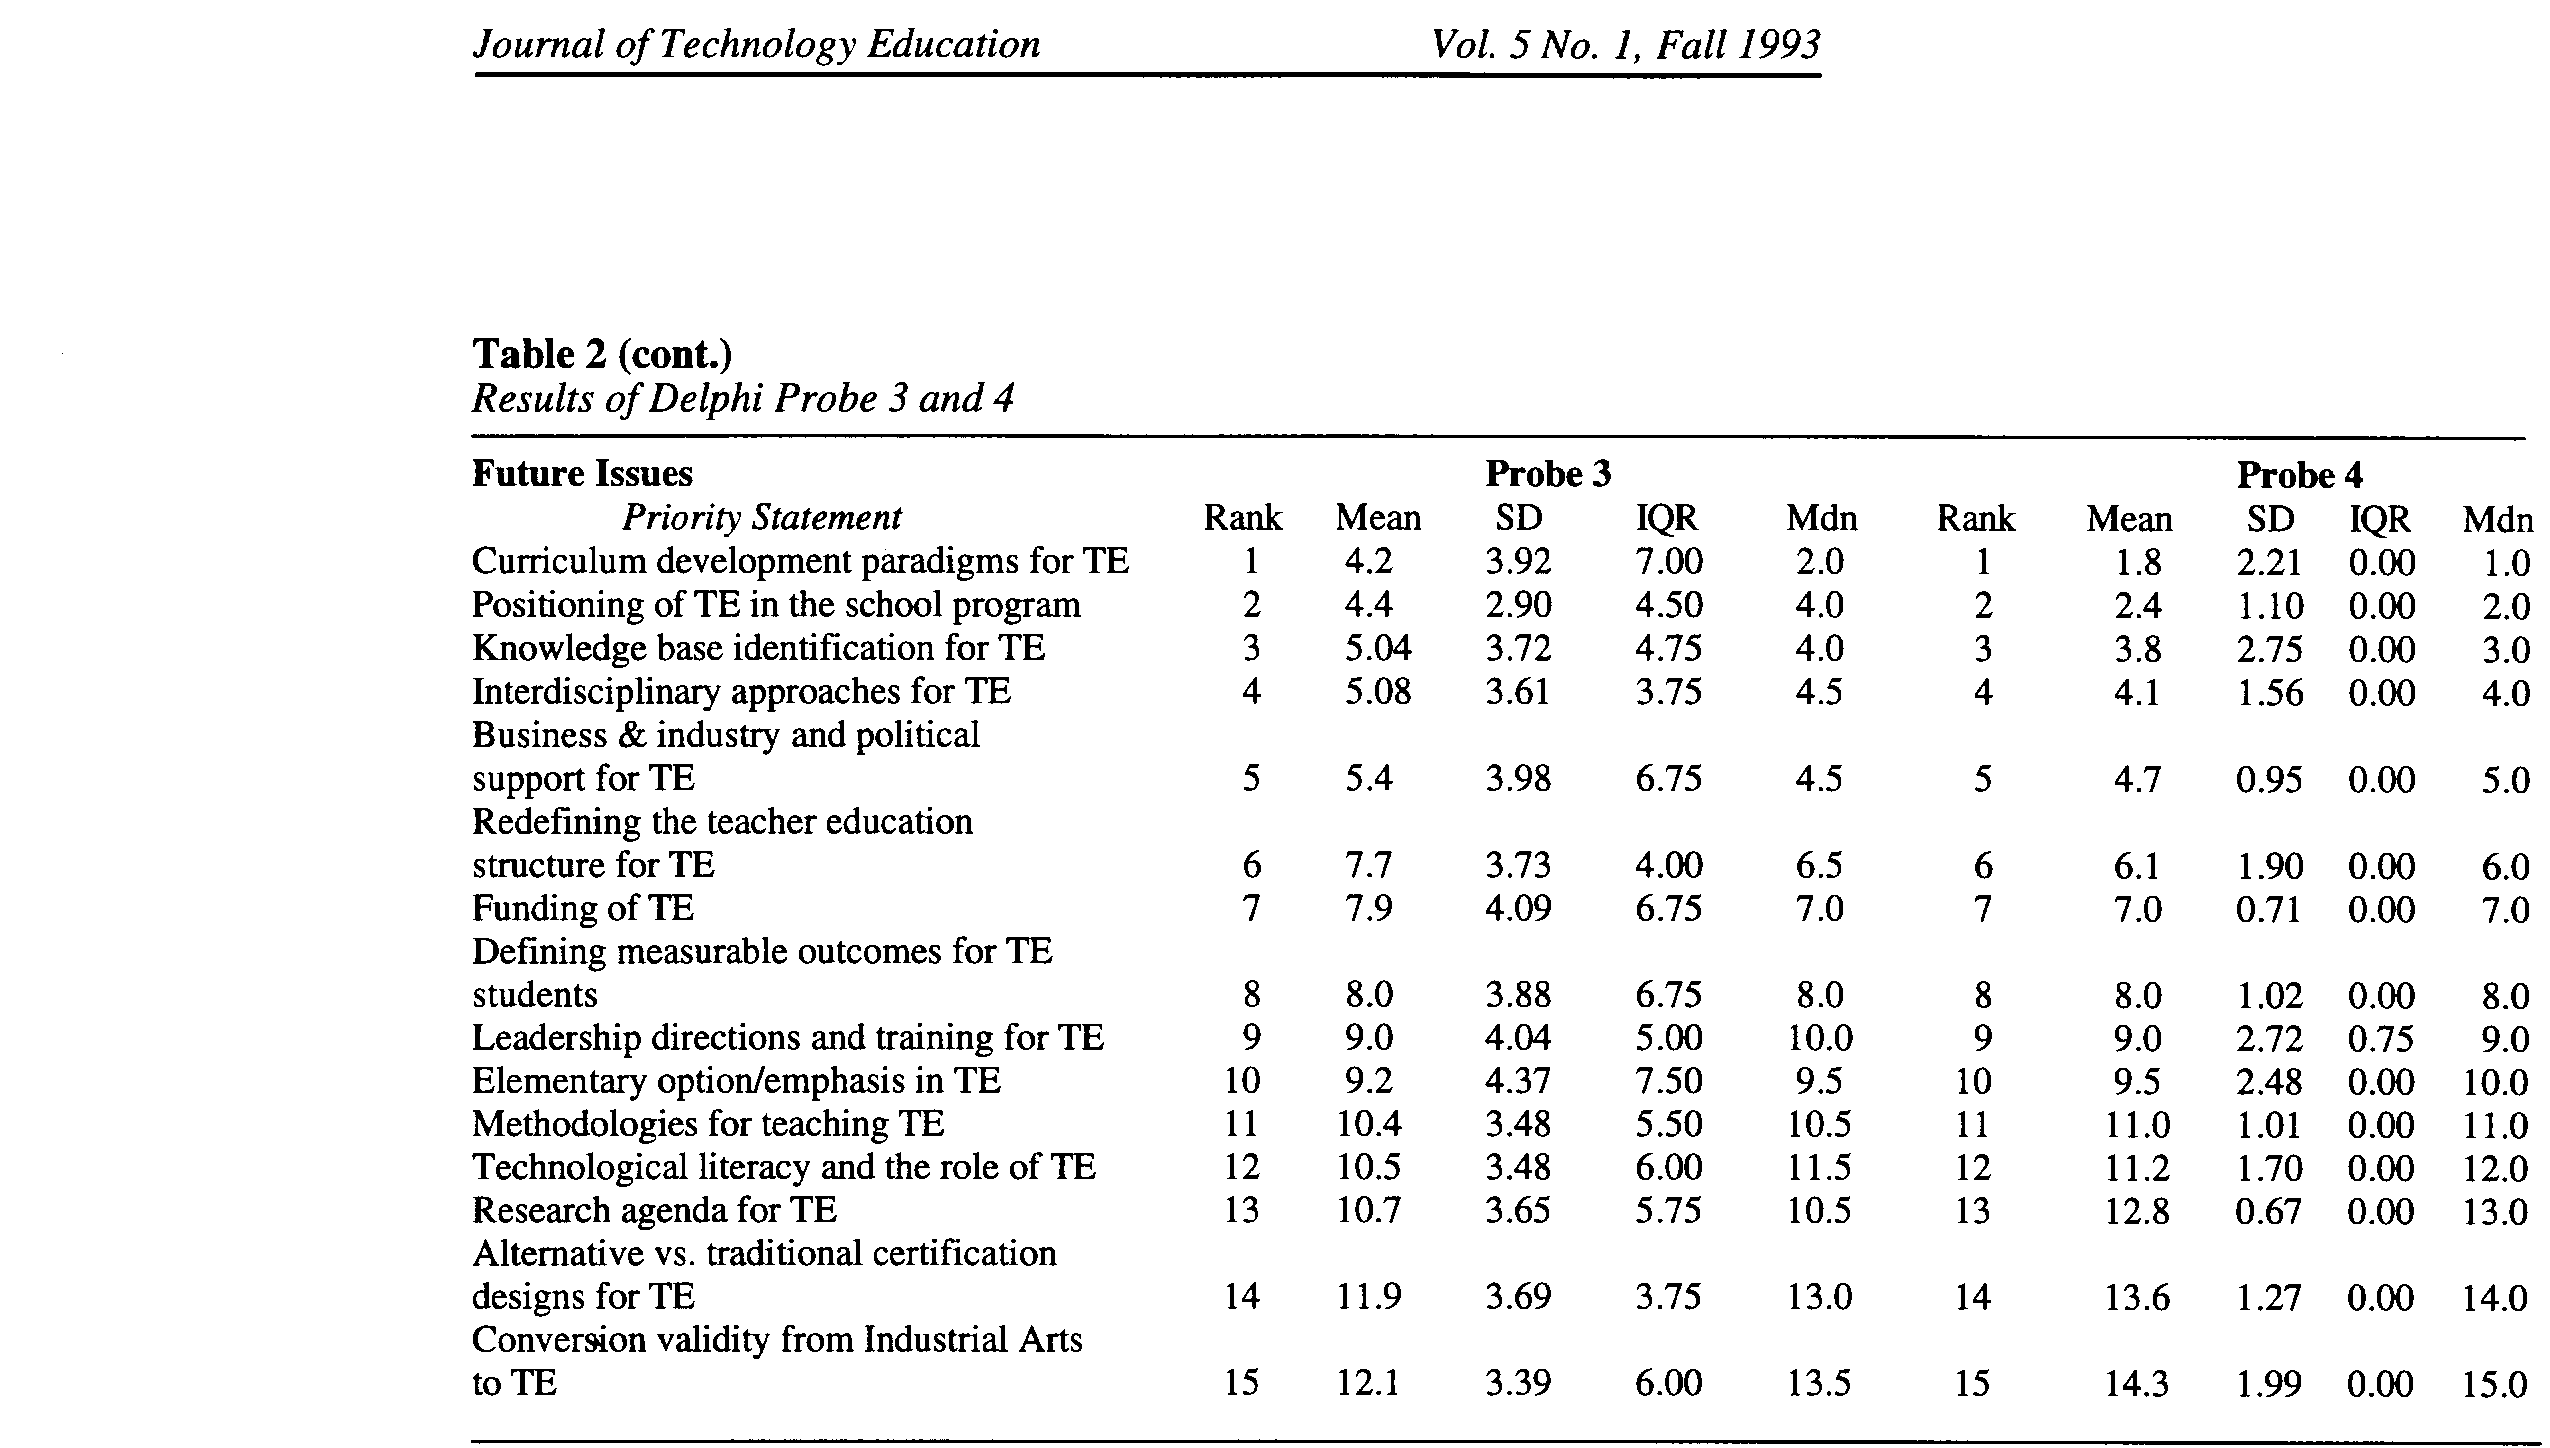 Table 2. Results of Delphi Probe 3 and 4 (cont.)